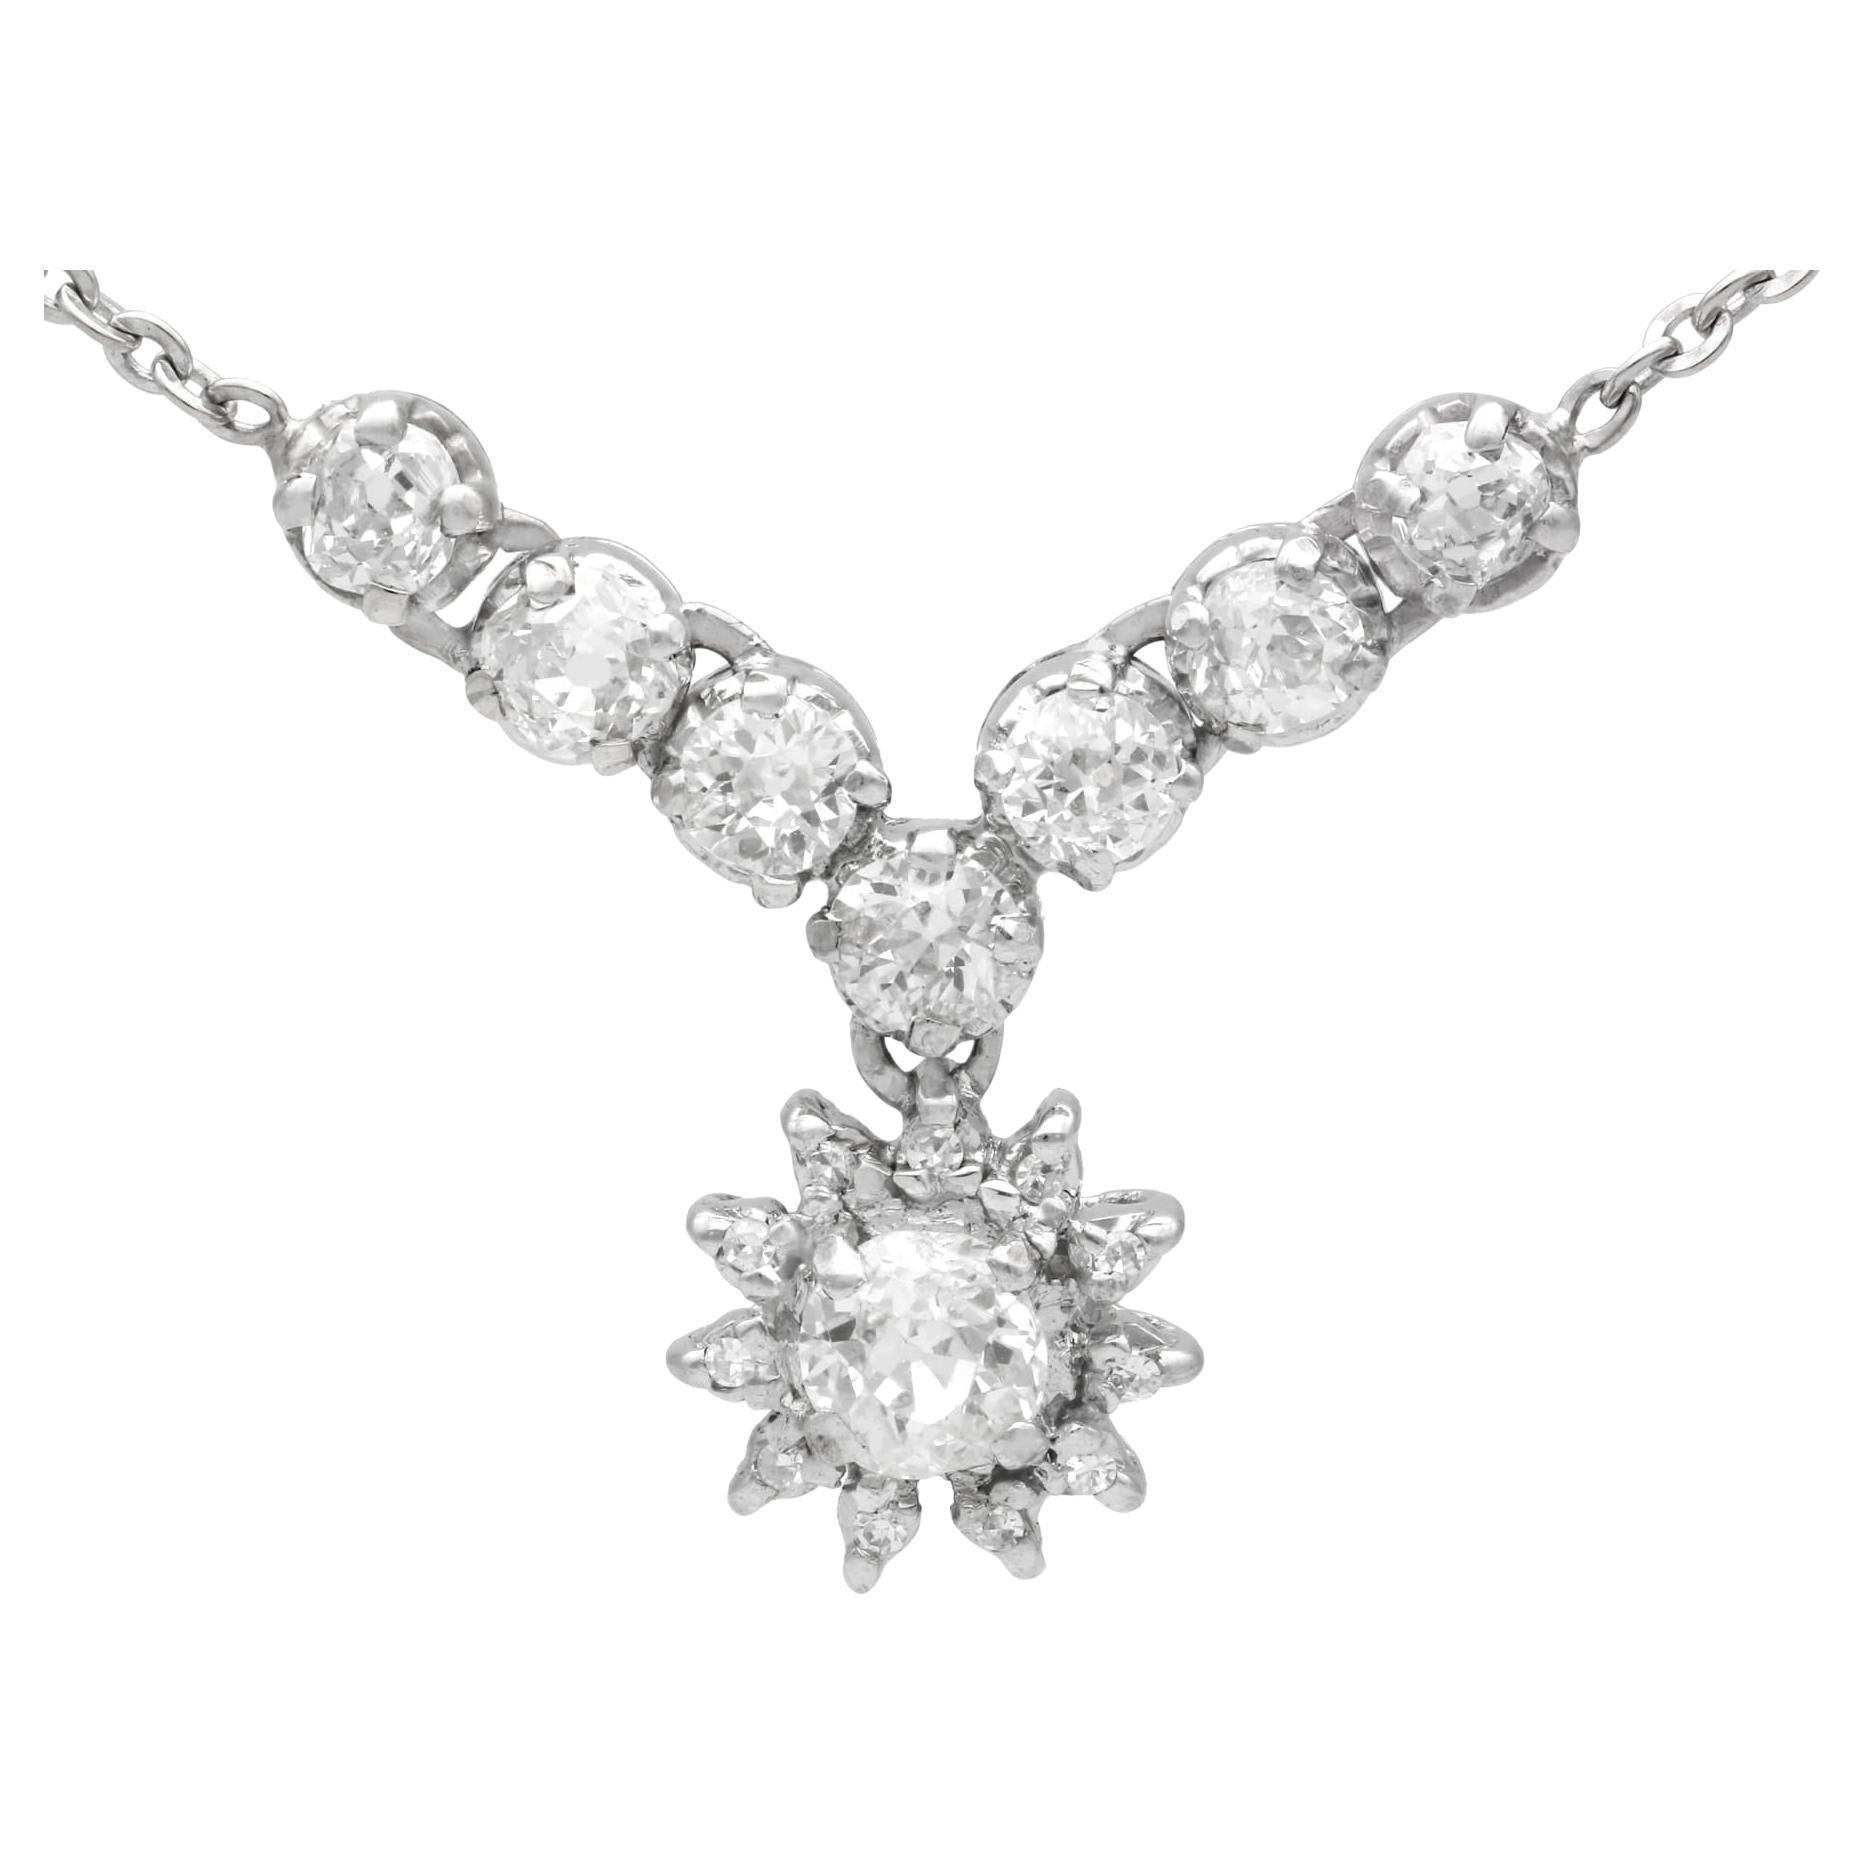 Antique 1920s 1.99 Carat Diamond and Silver Necklace